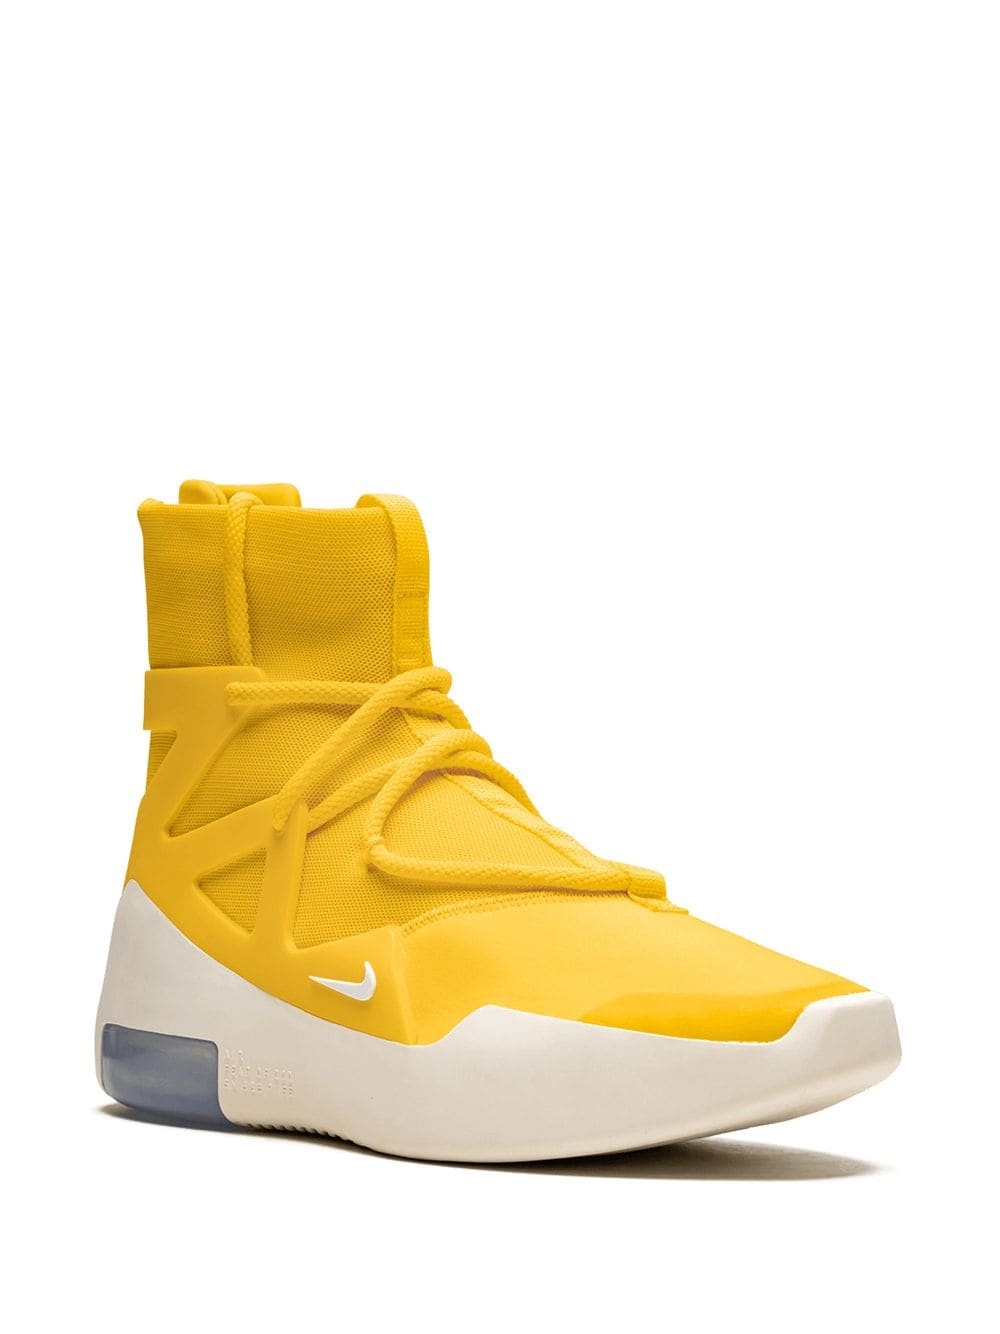 Air Fear Of God 1 "Amarillo" sneakers - 2